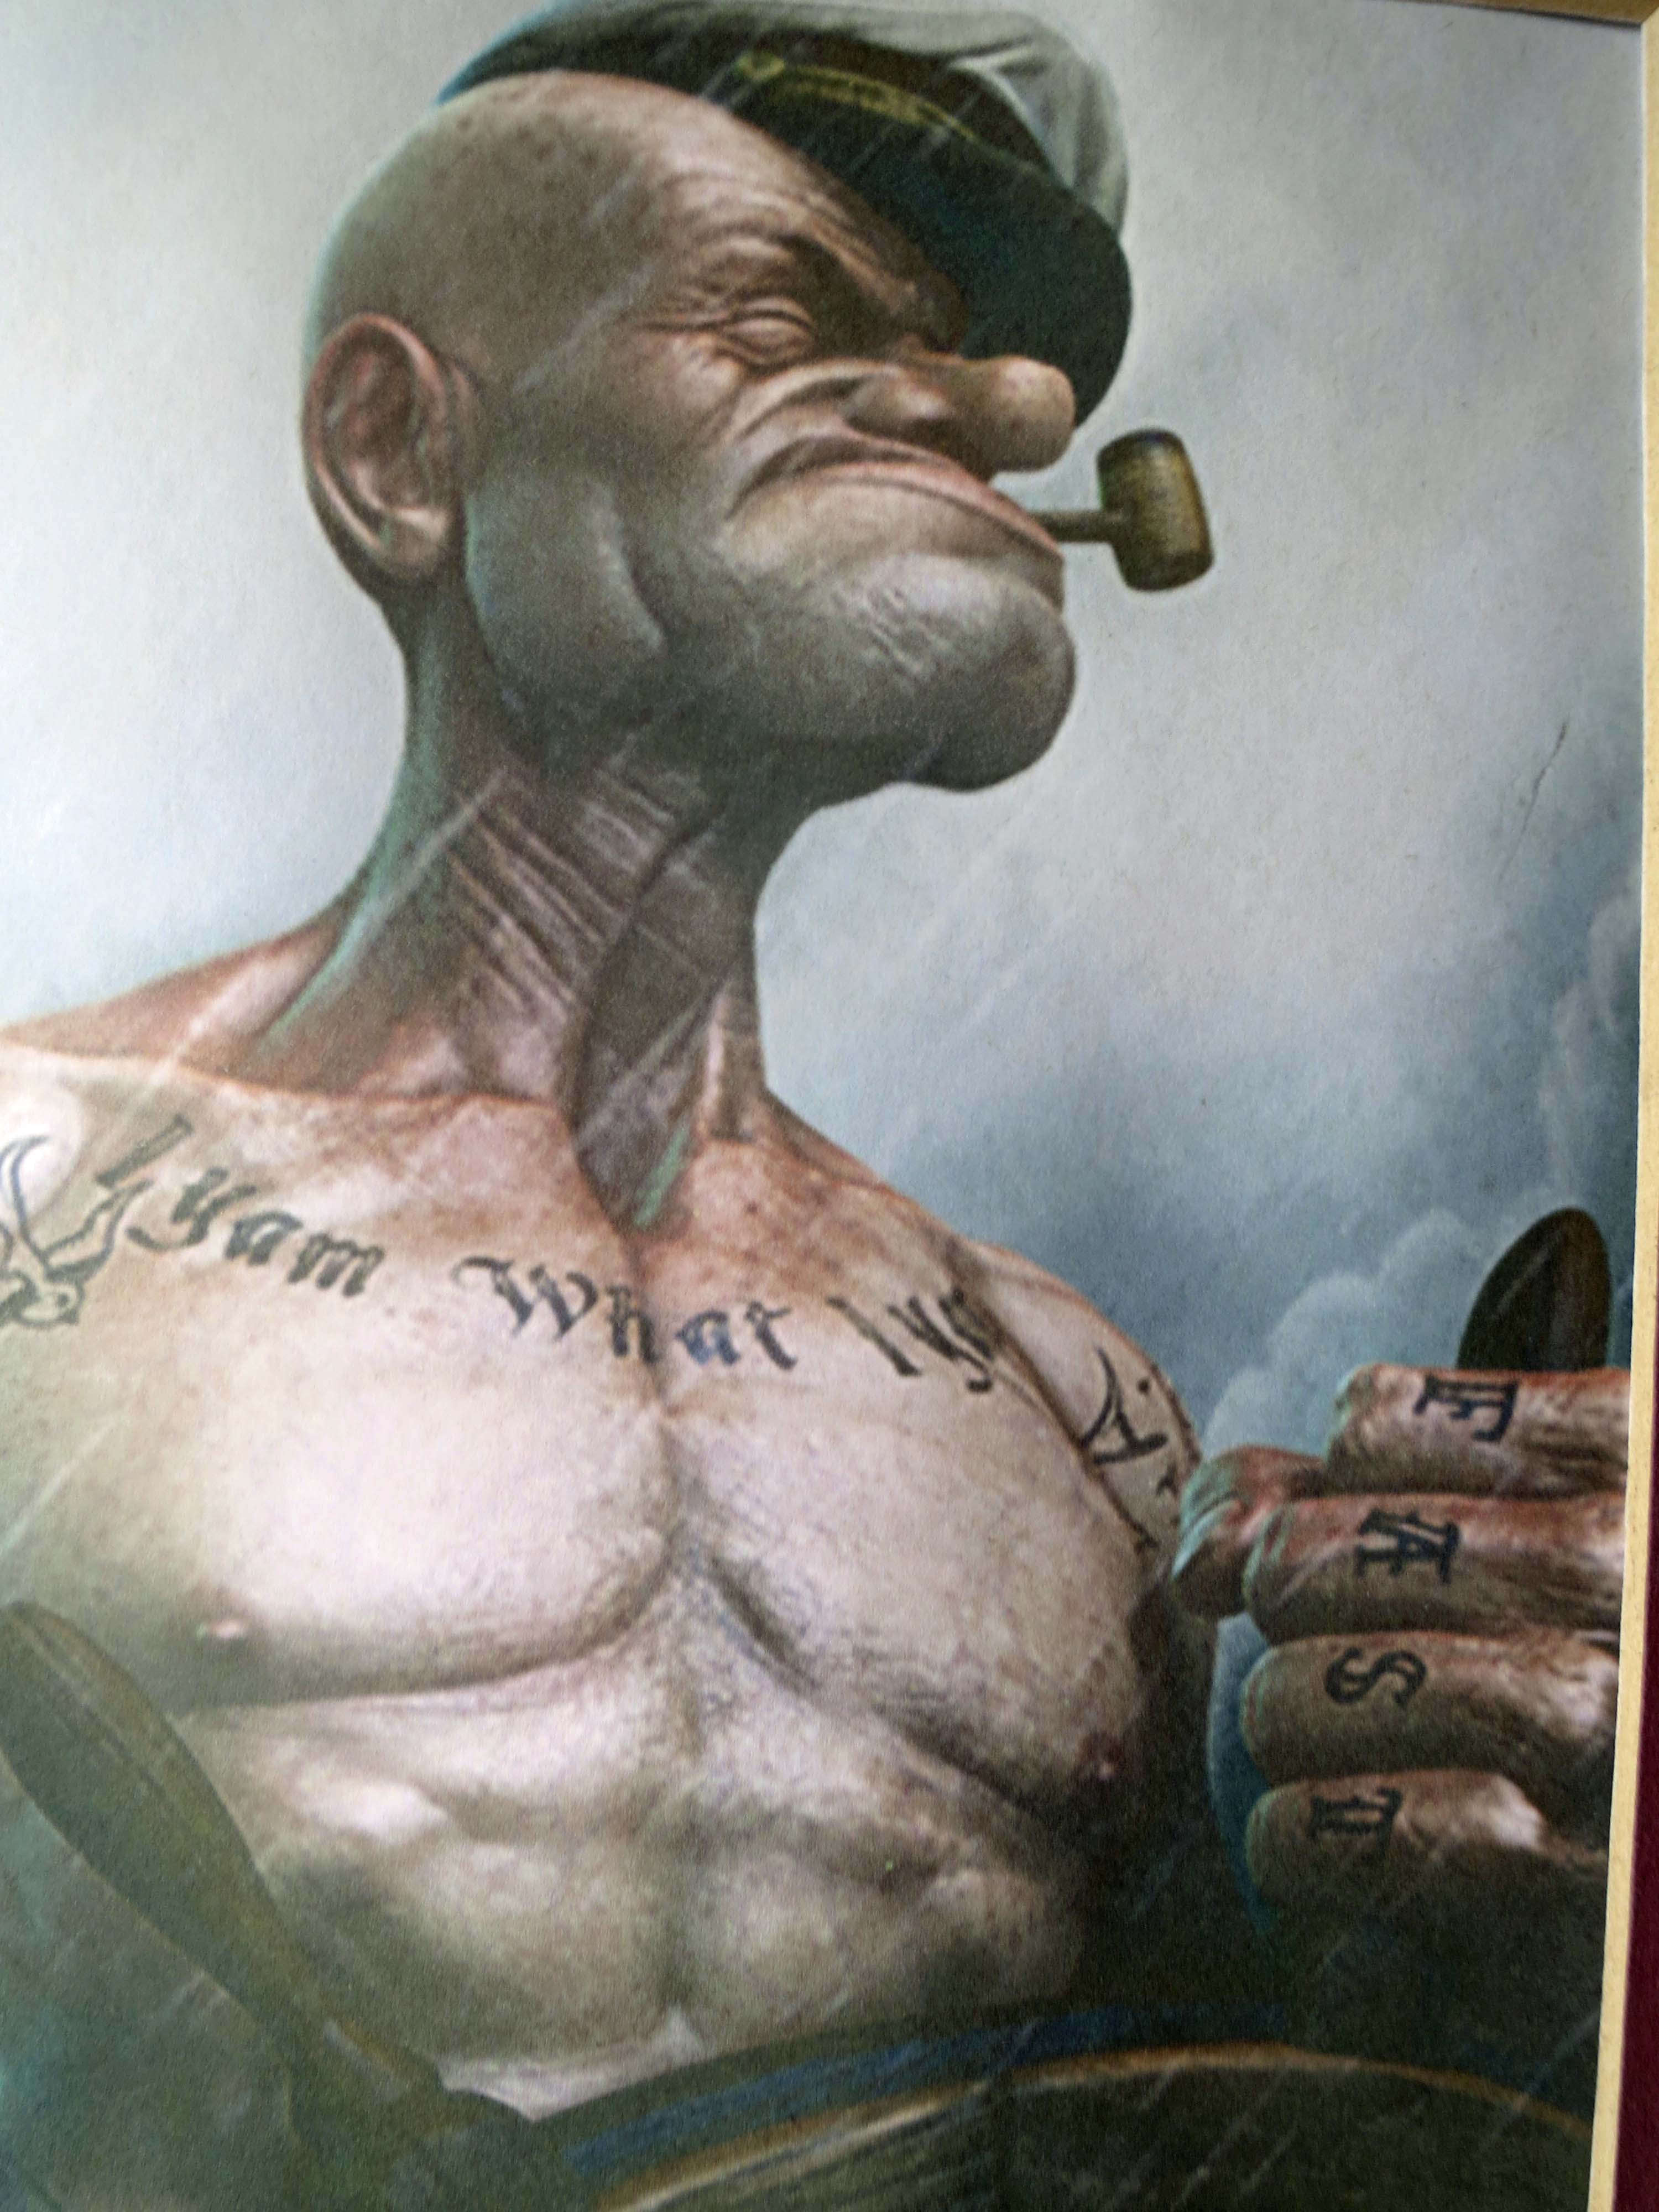 Popeye At Triangle Tattoo In Fort Bragg Wandering Through.